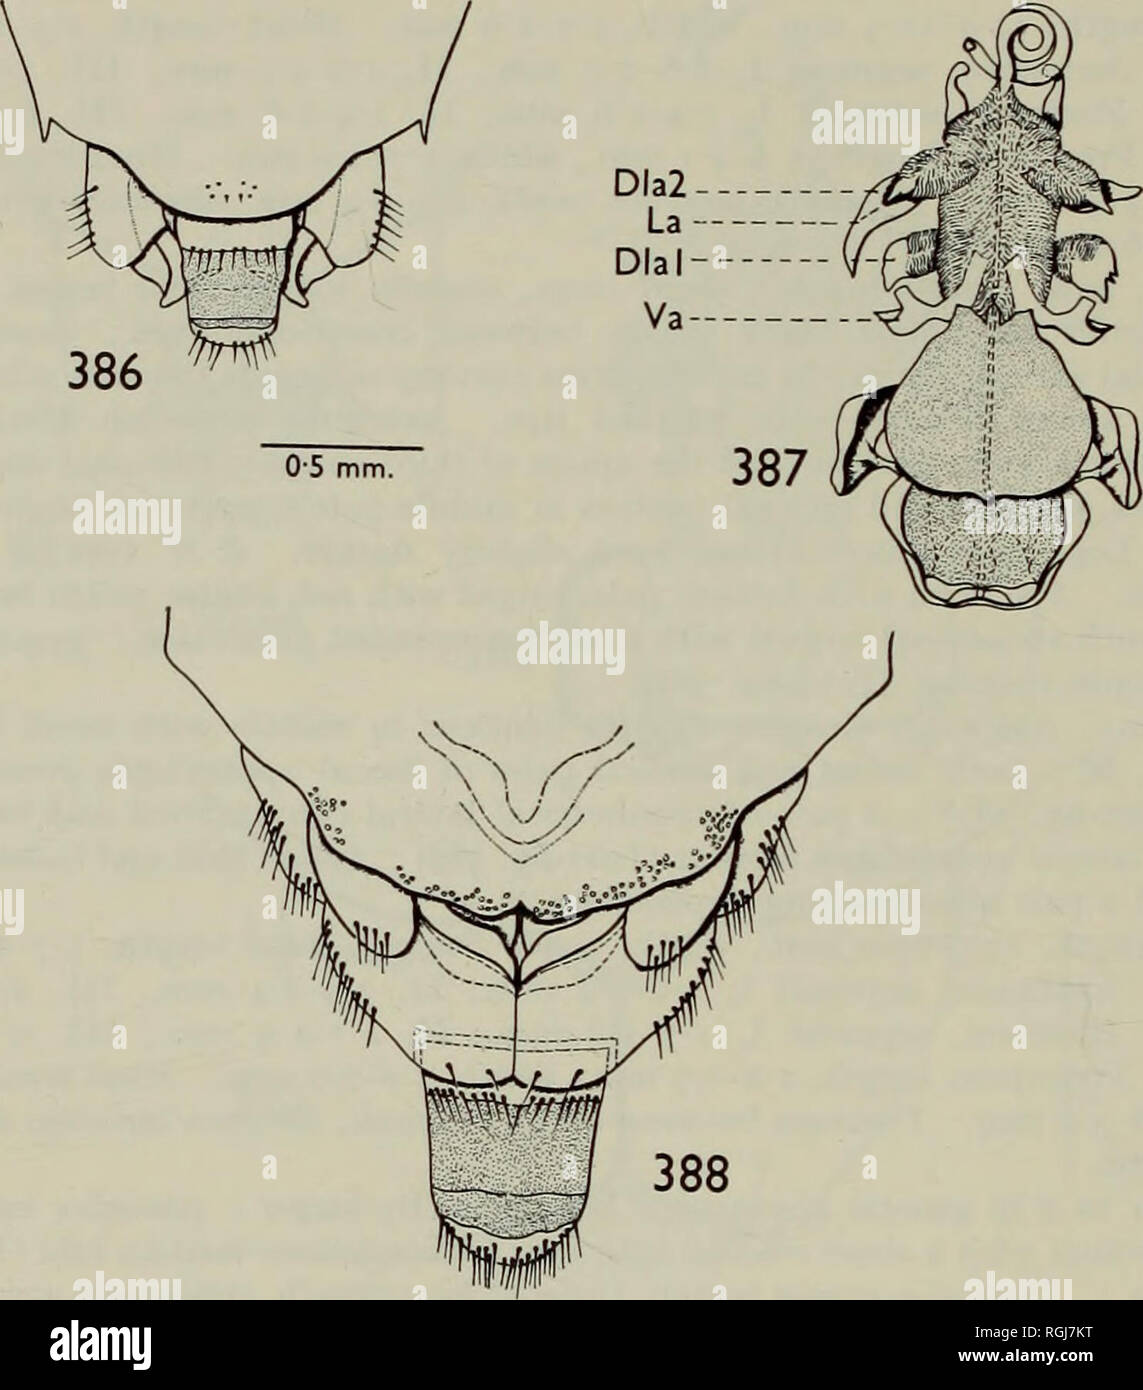 Bulletin of the British Museum (Natural History) Entom Supp. I. AHMAD The  diagram of the lateral side of the head of G. pallipectus Hsiao (1963)  resembles B. minutus and if he